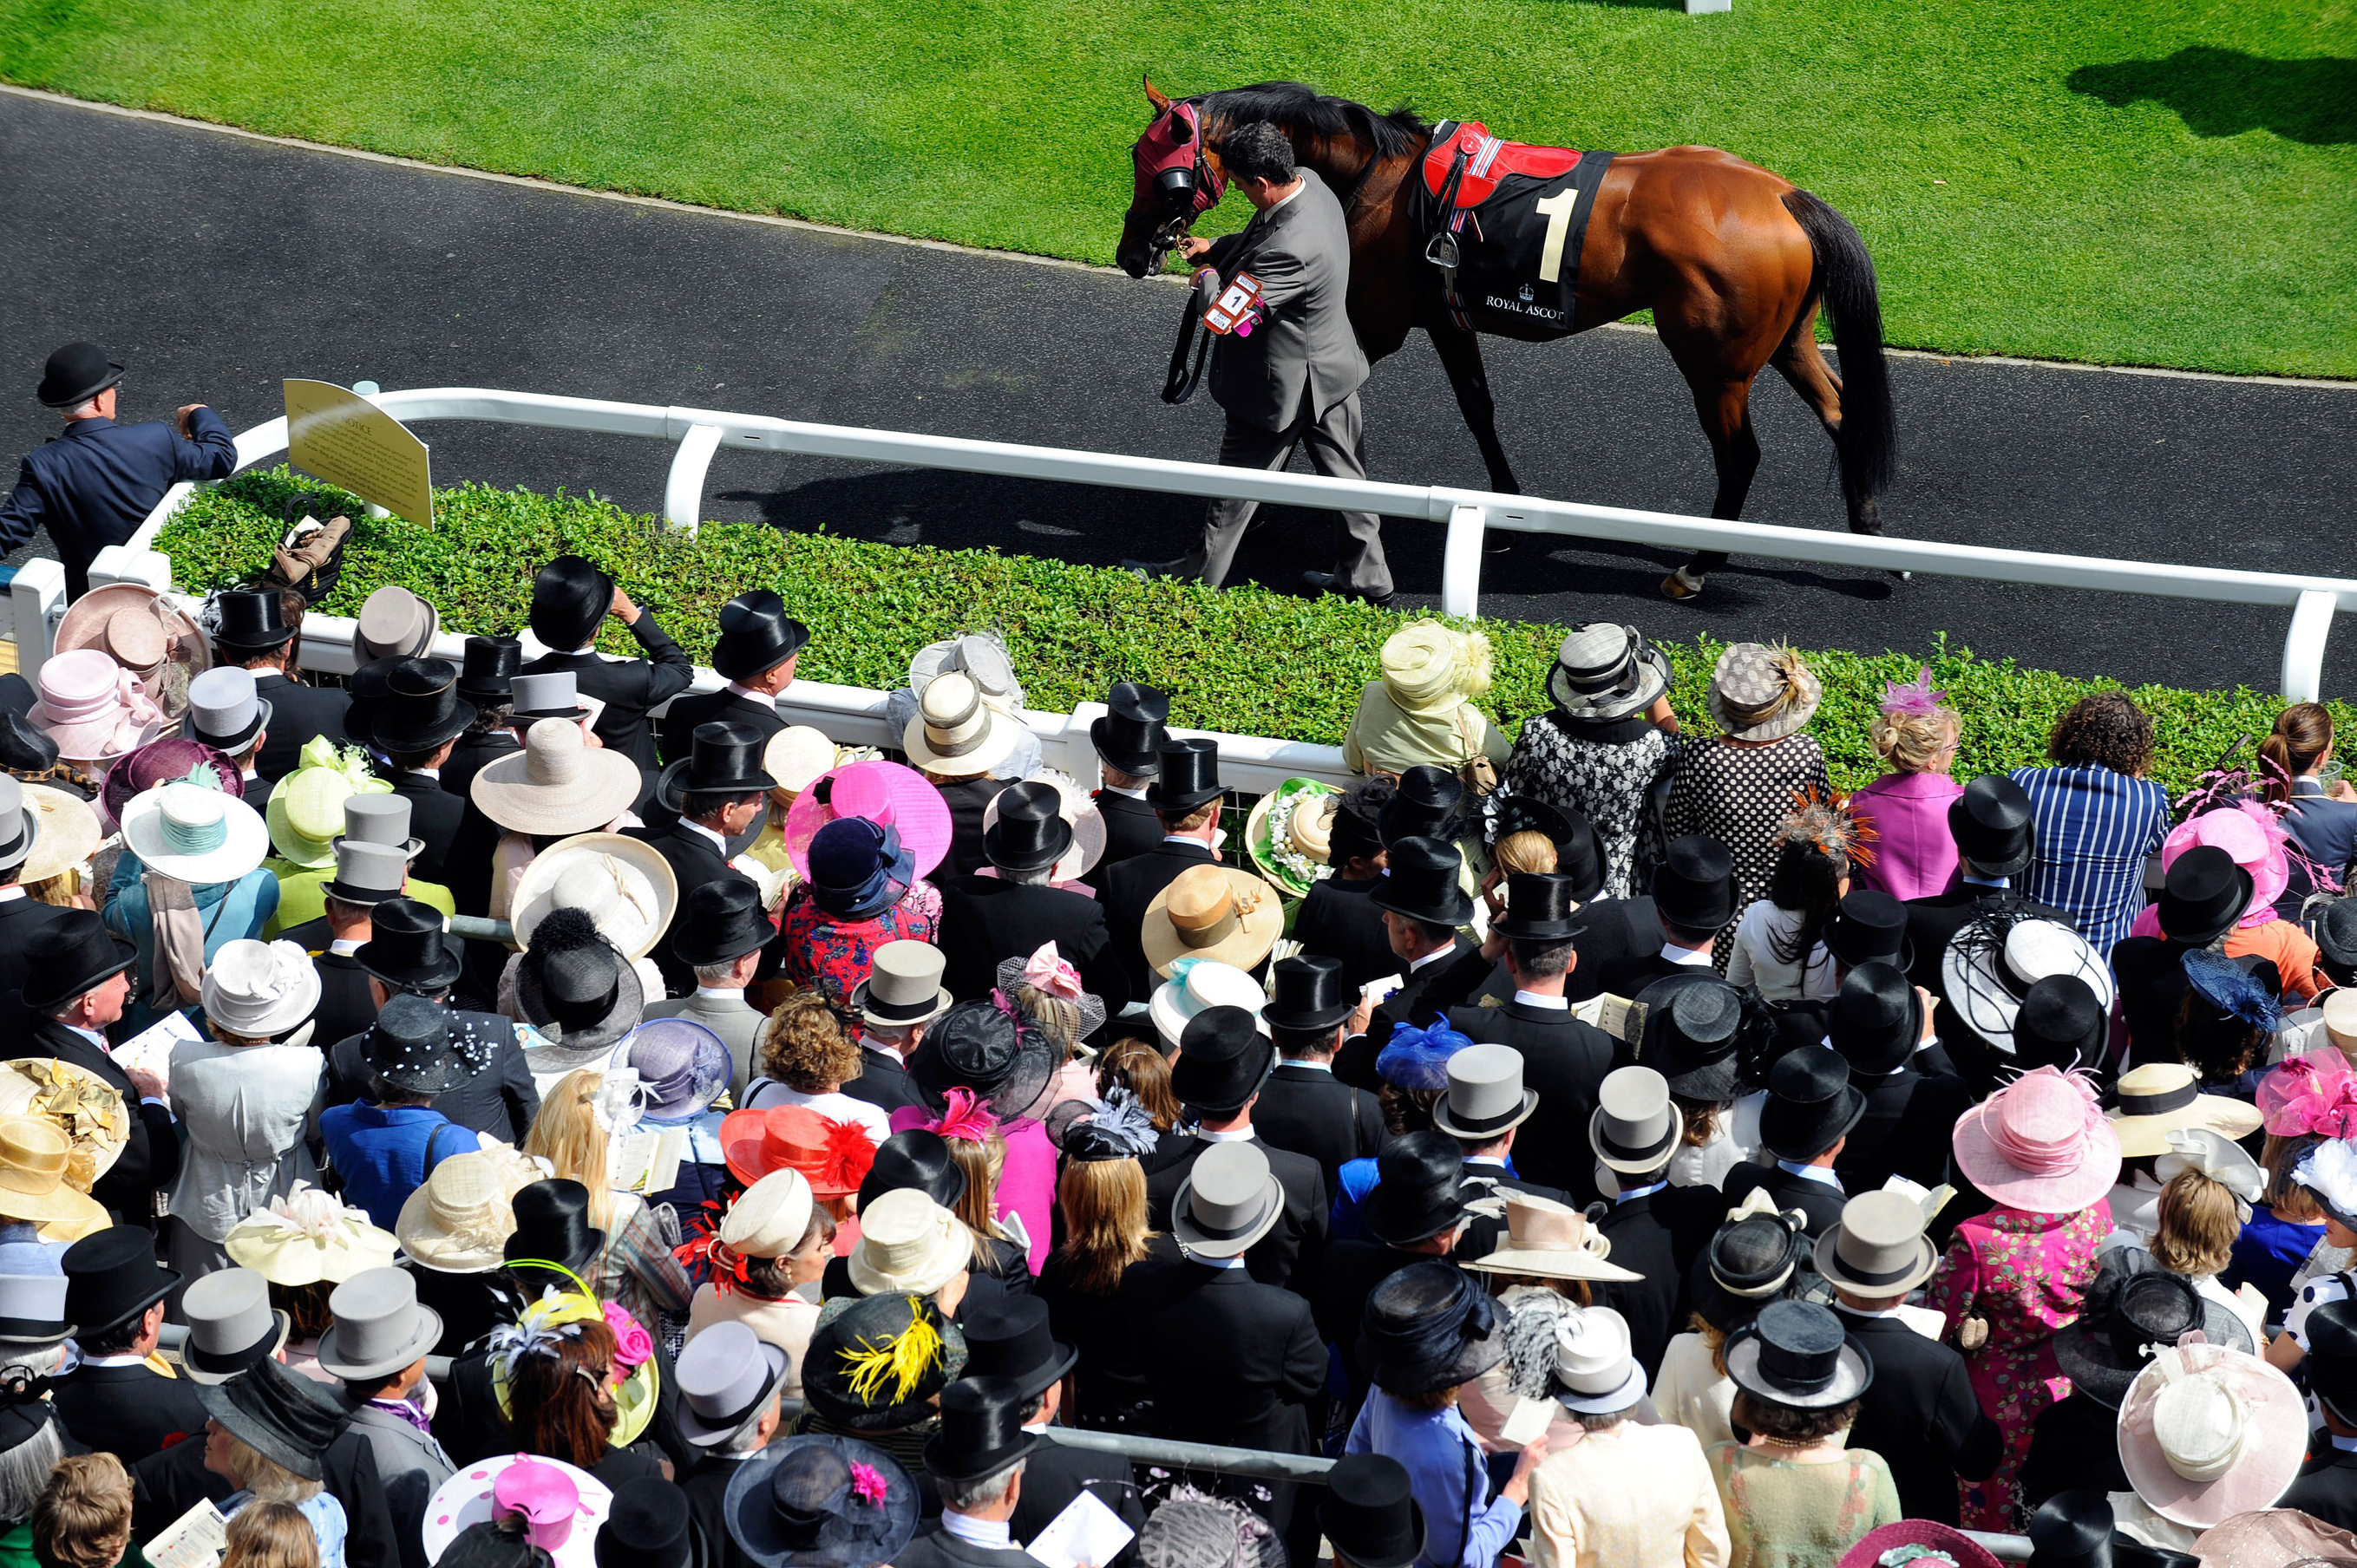 Overhead view of crowds at Royal Ascot